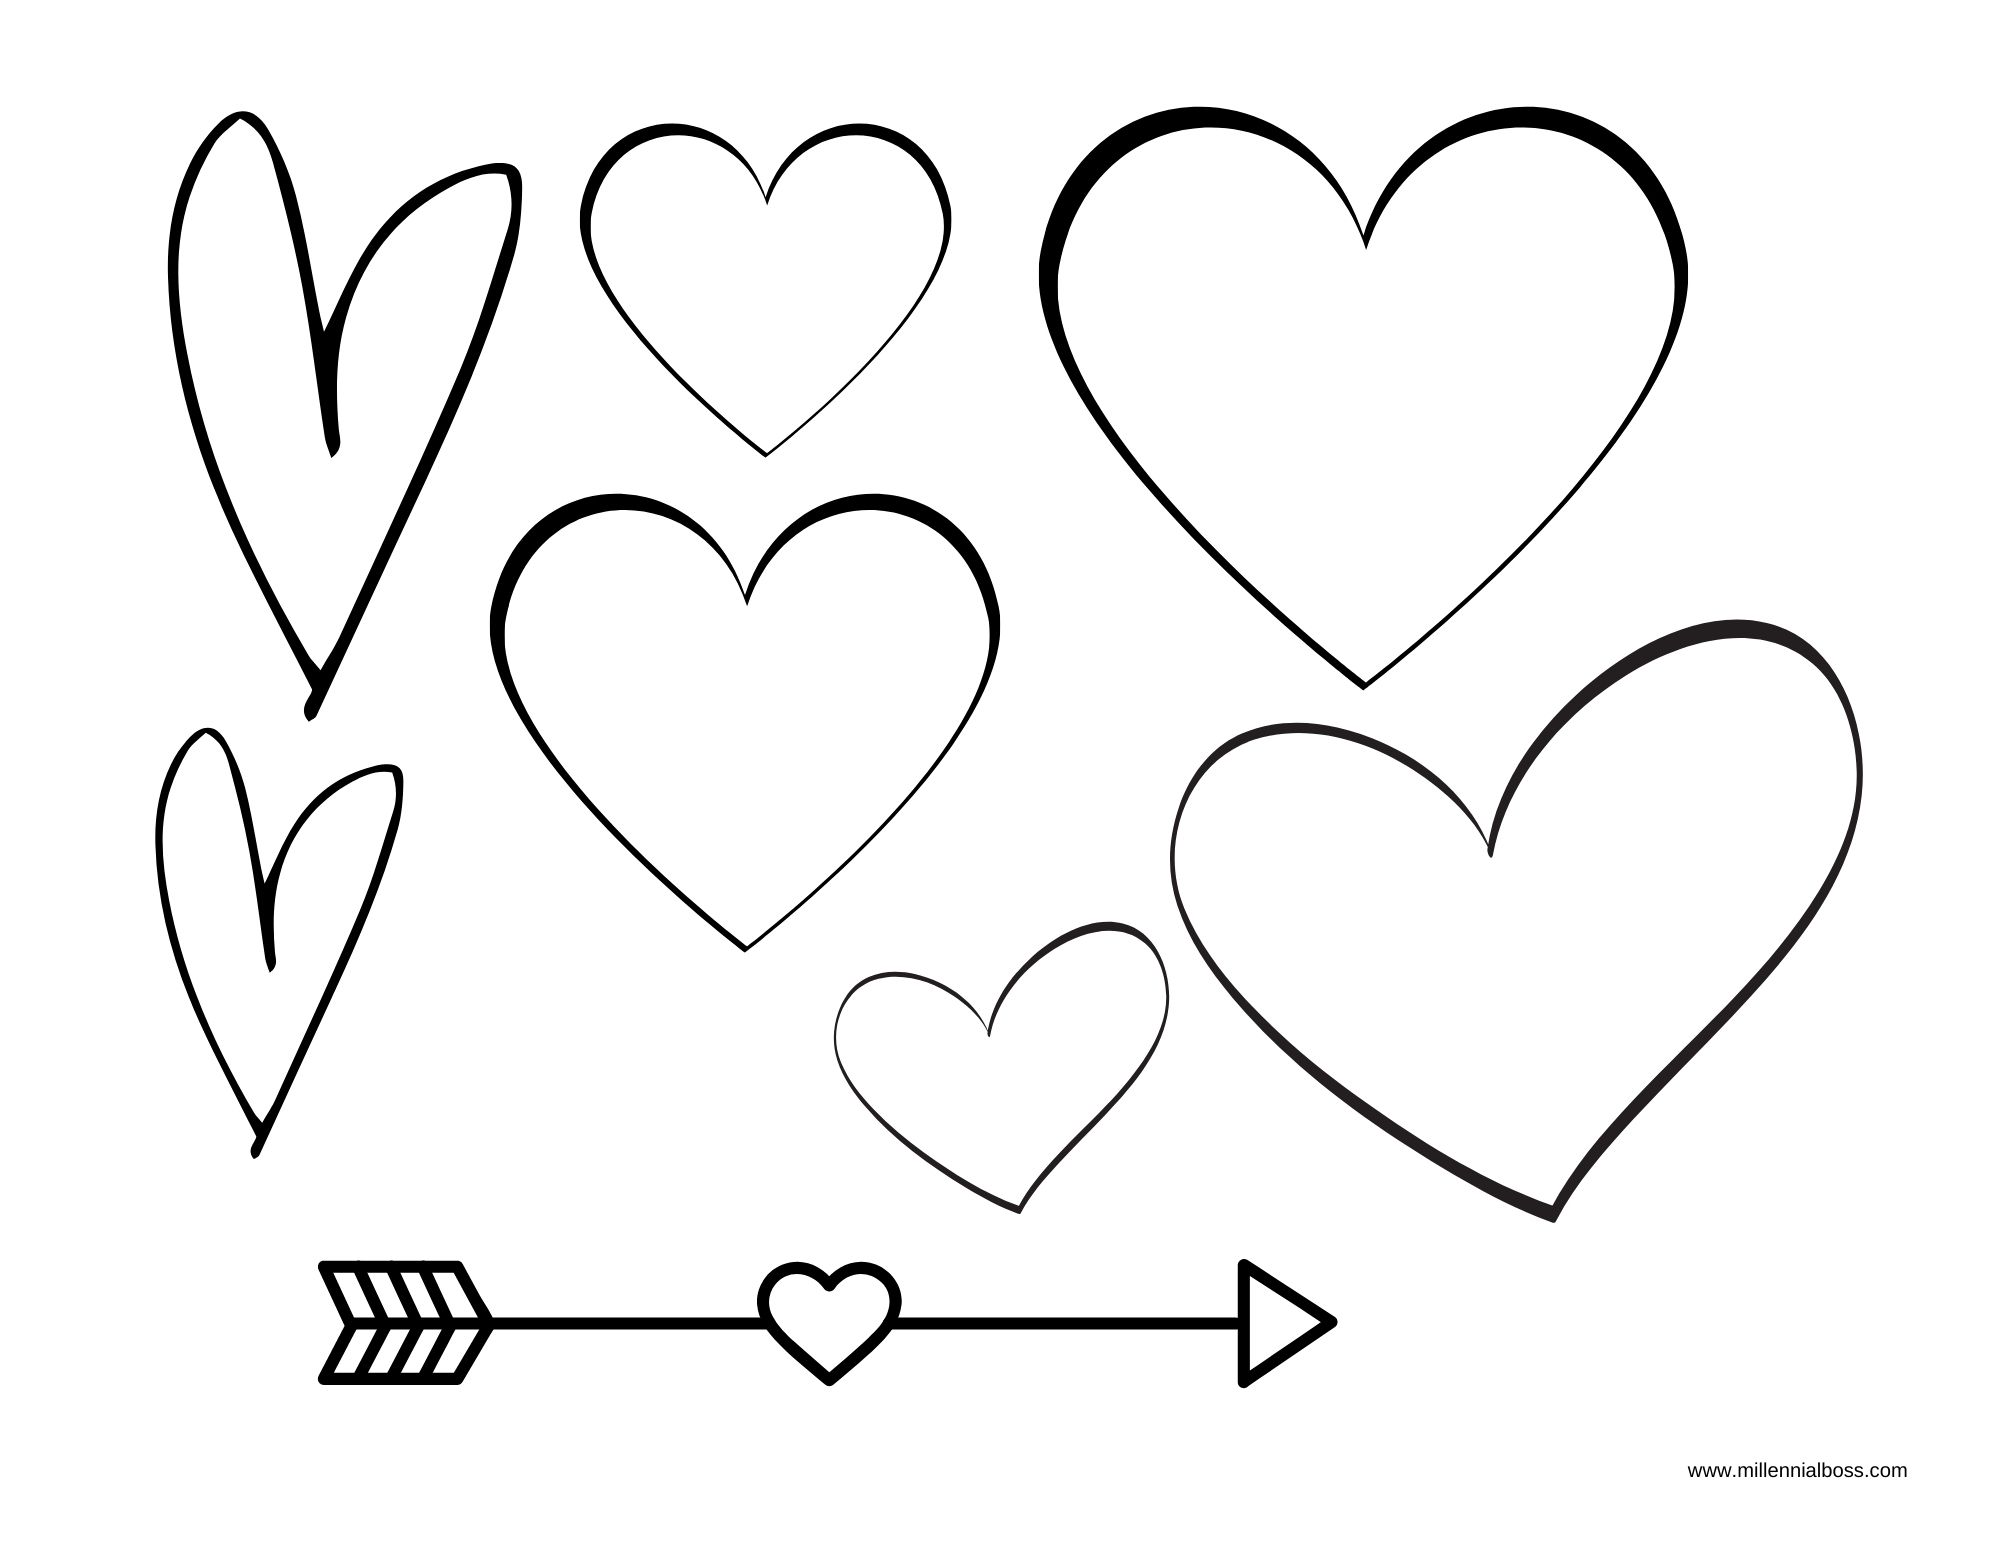 Printable Heart Templates Different Sizes